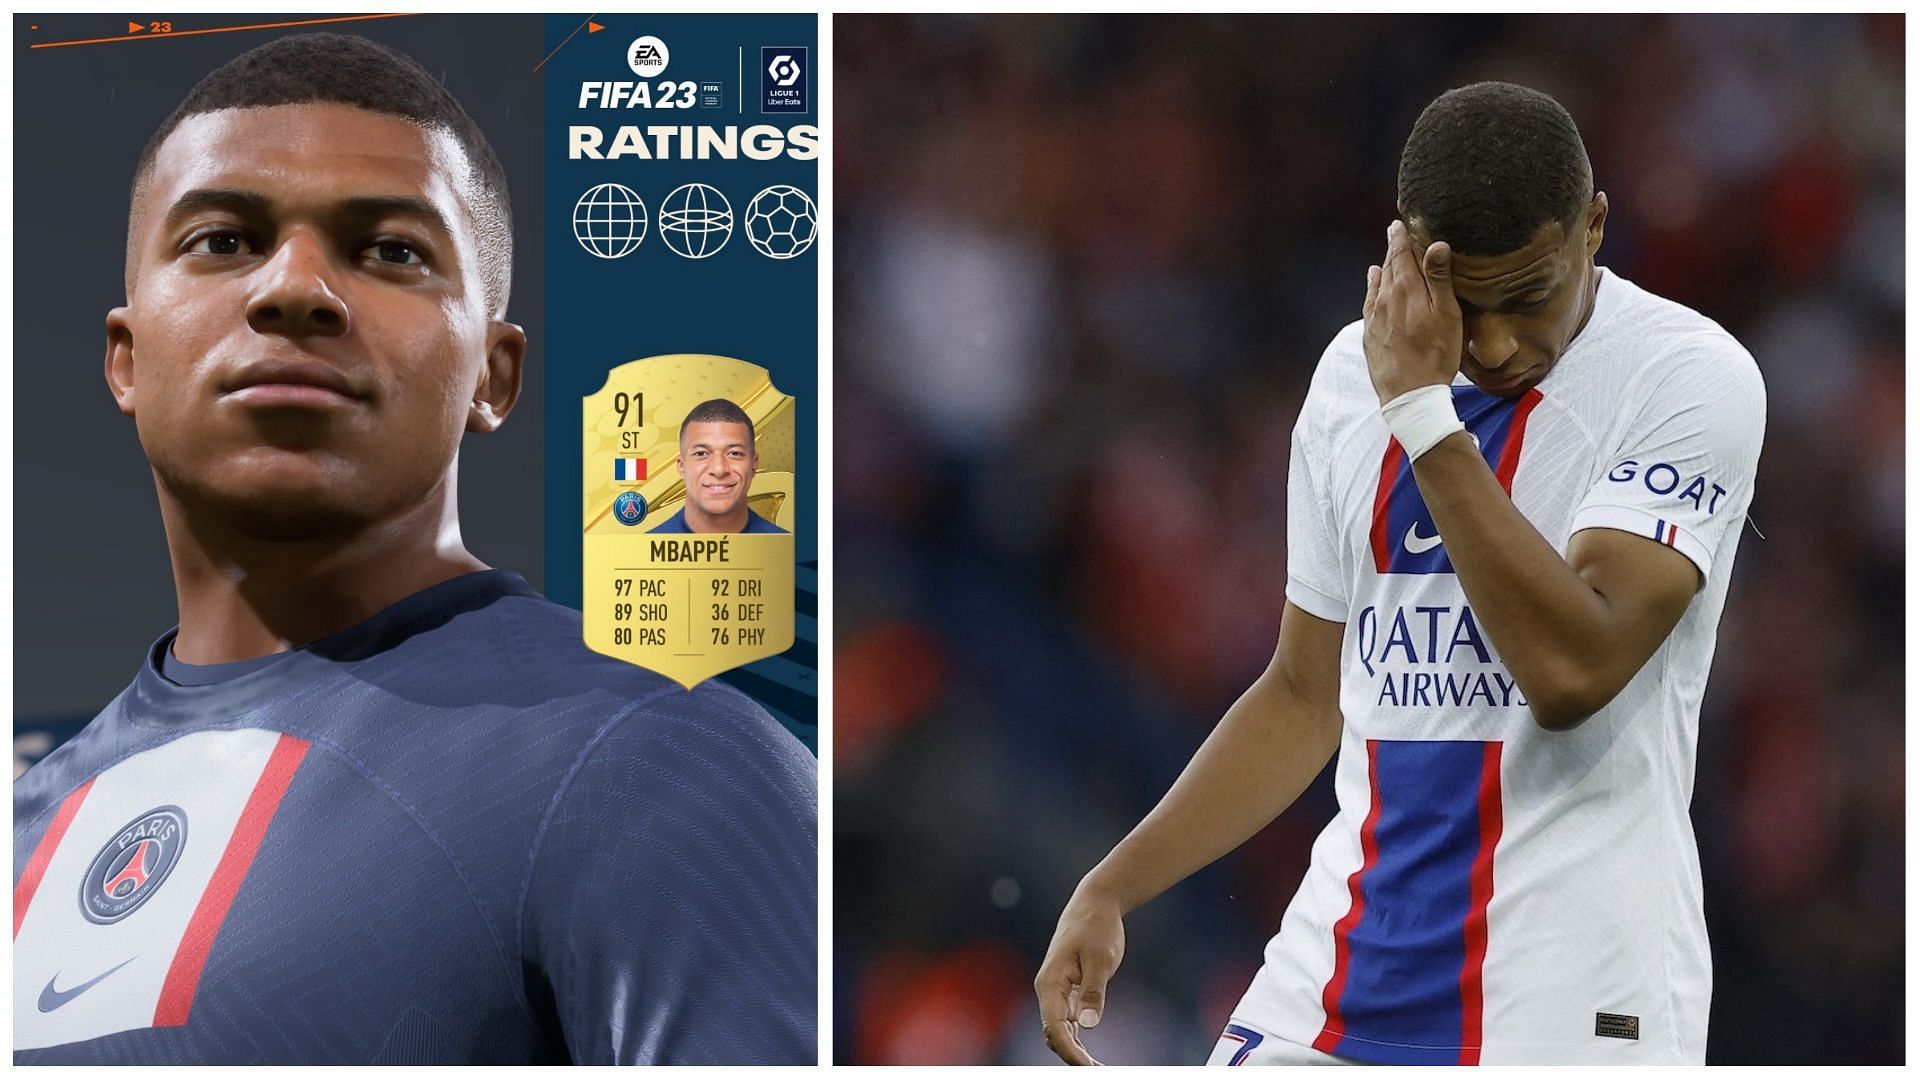 These players reacted to their FIFA 23 rating reveal and were not too impressed (Images via EA Sports and Getty images)